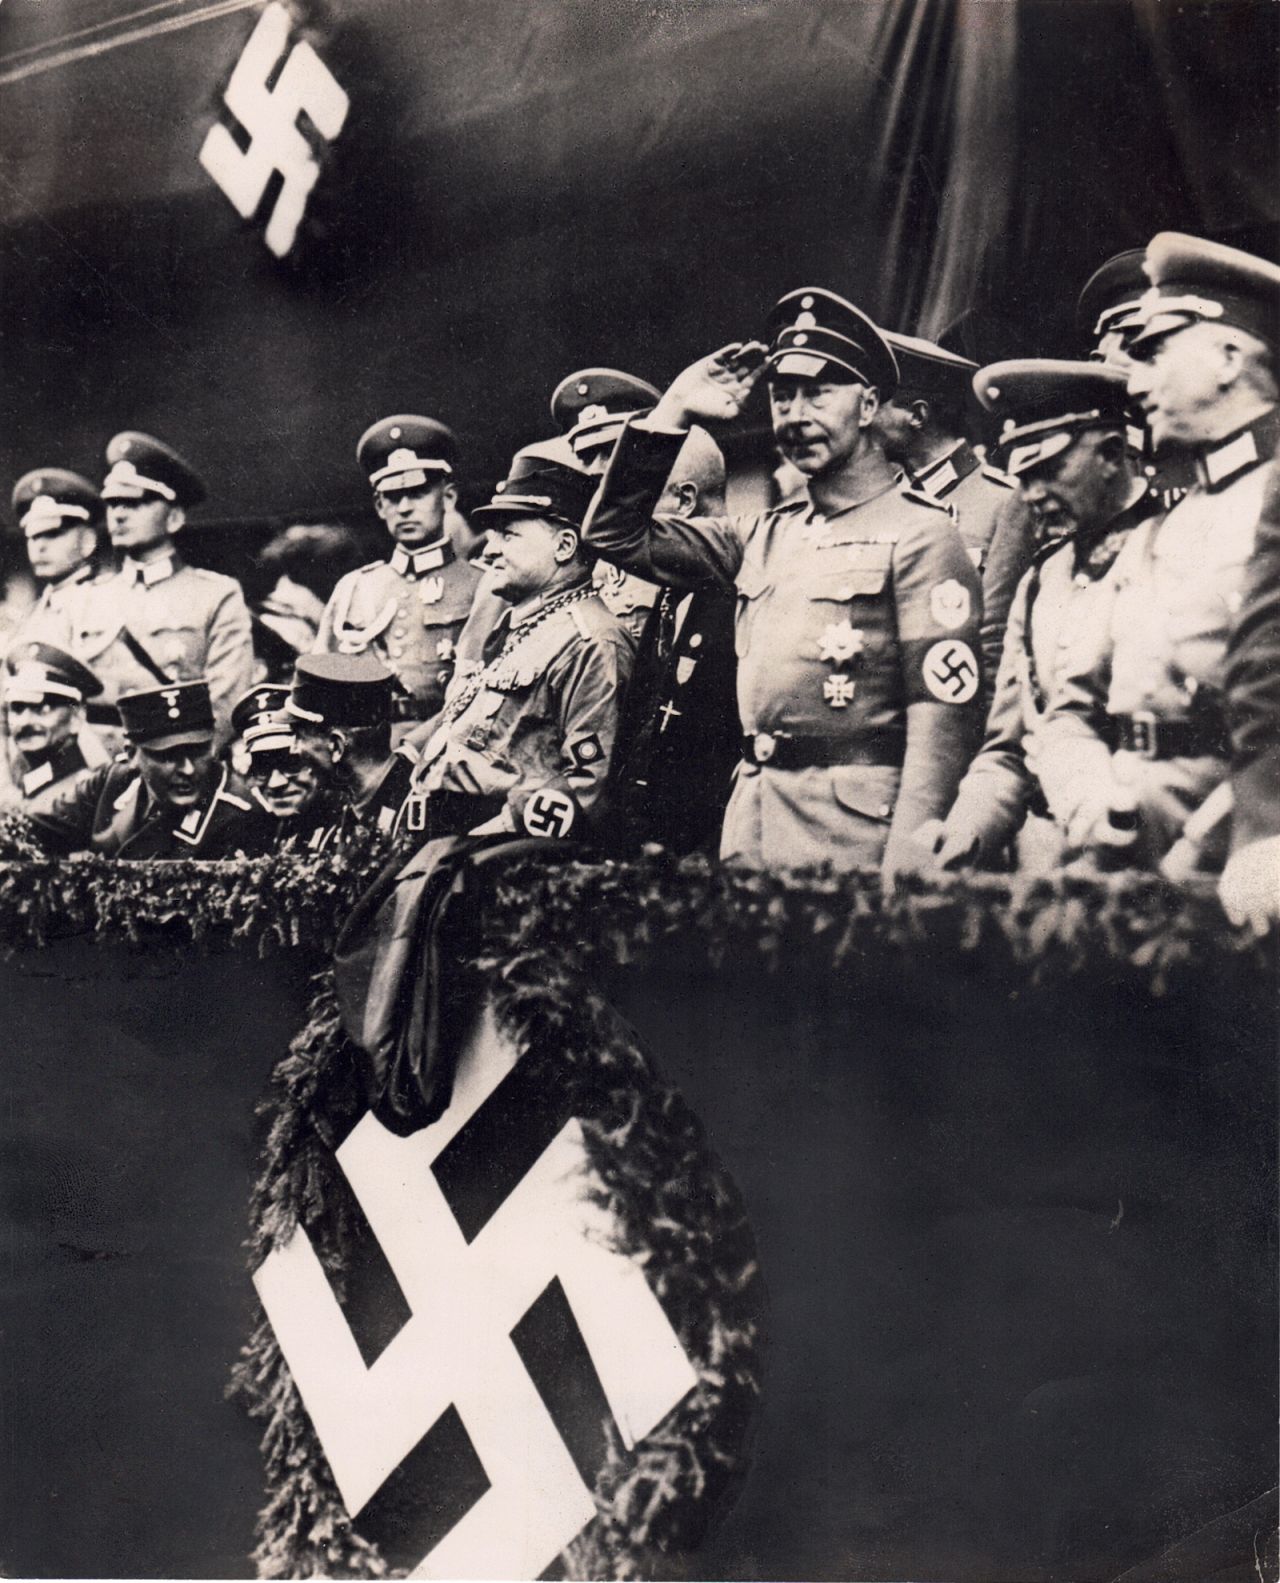 A photograph discovered by historian John Rohl shows Germany's former Crown Prince Wilhelm saluting at an SA rally in October 1933. 